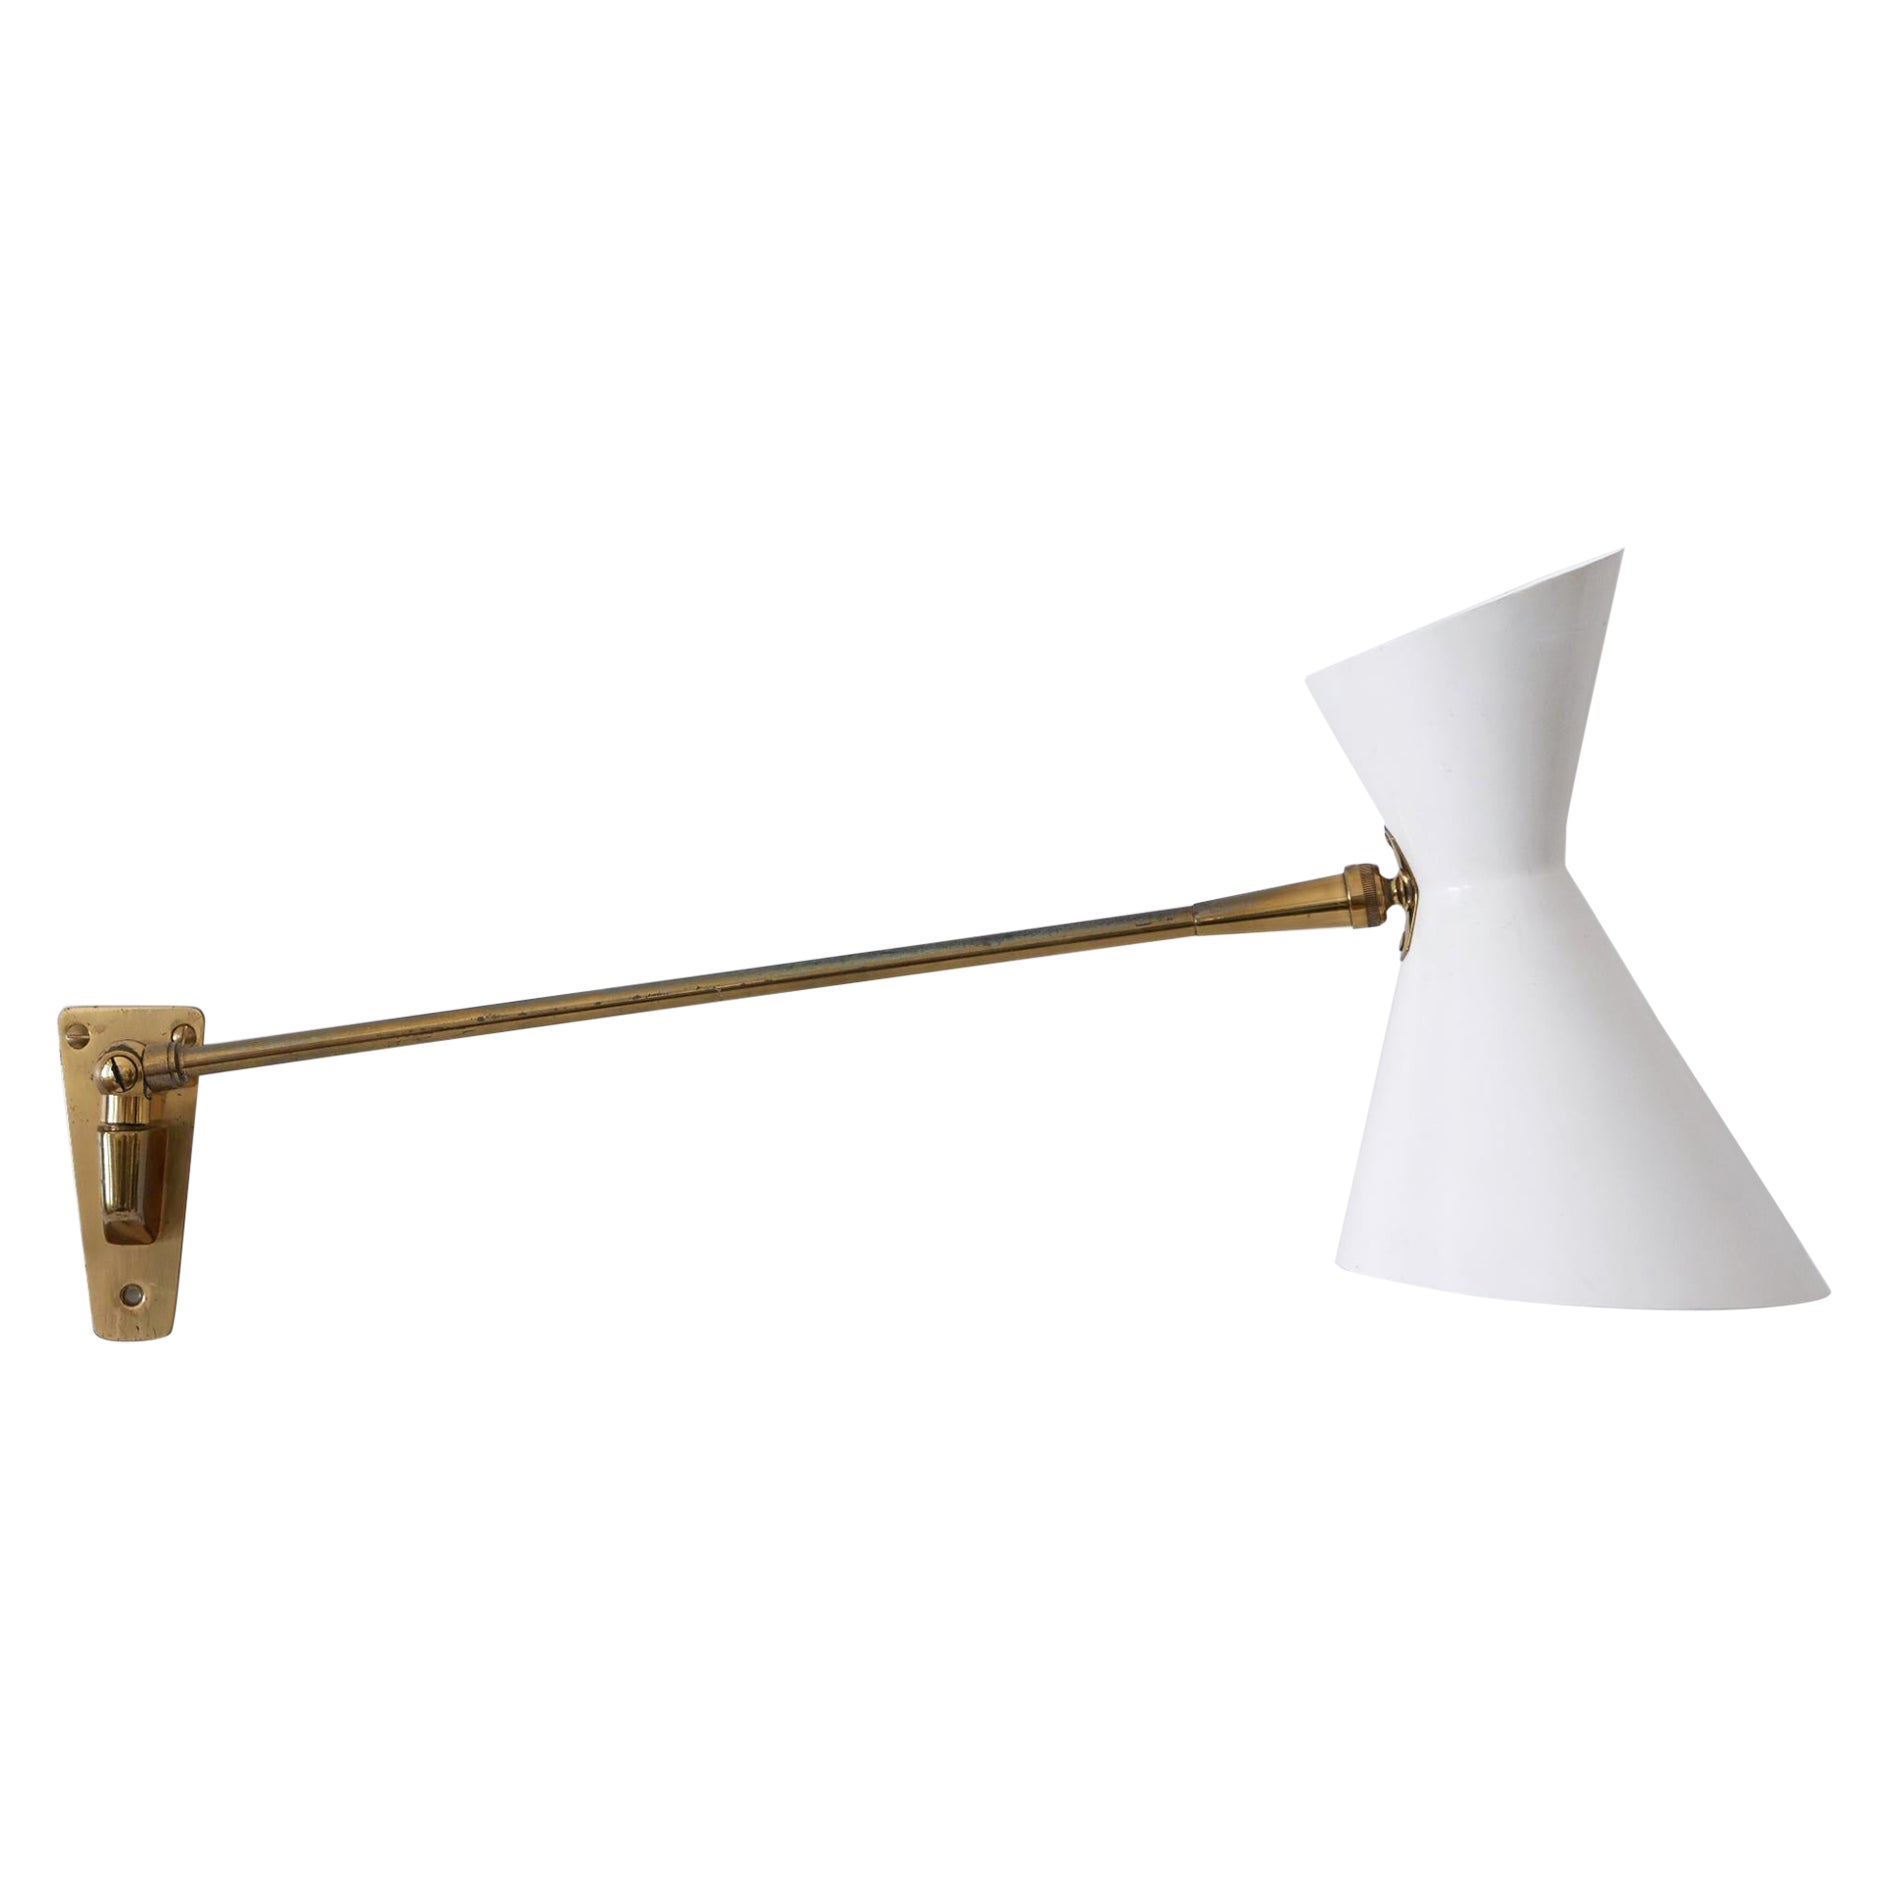 Elegant Mid Century Articulated Diabolo Wall Lamp by Belmag Switzerland 1950s For Sale